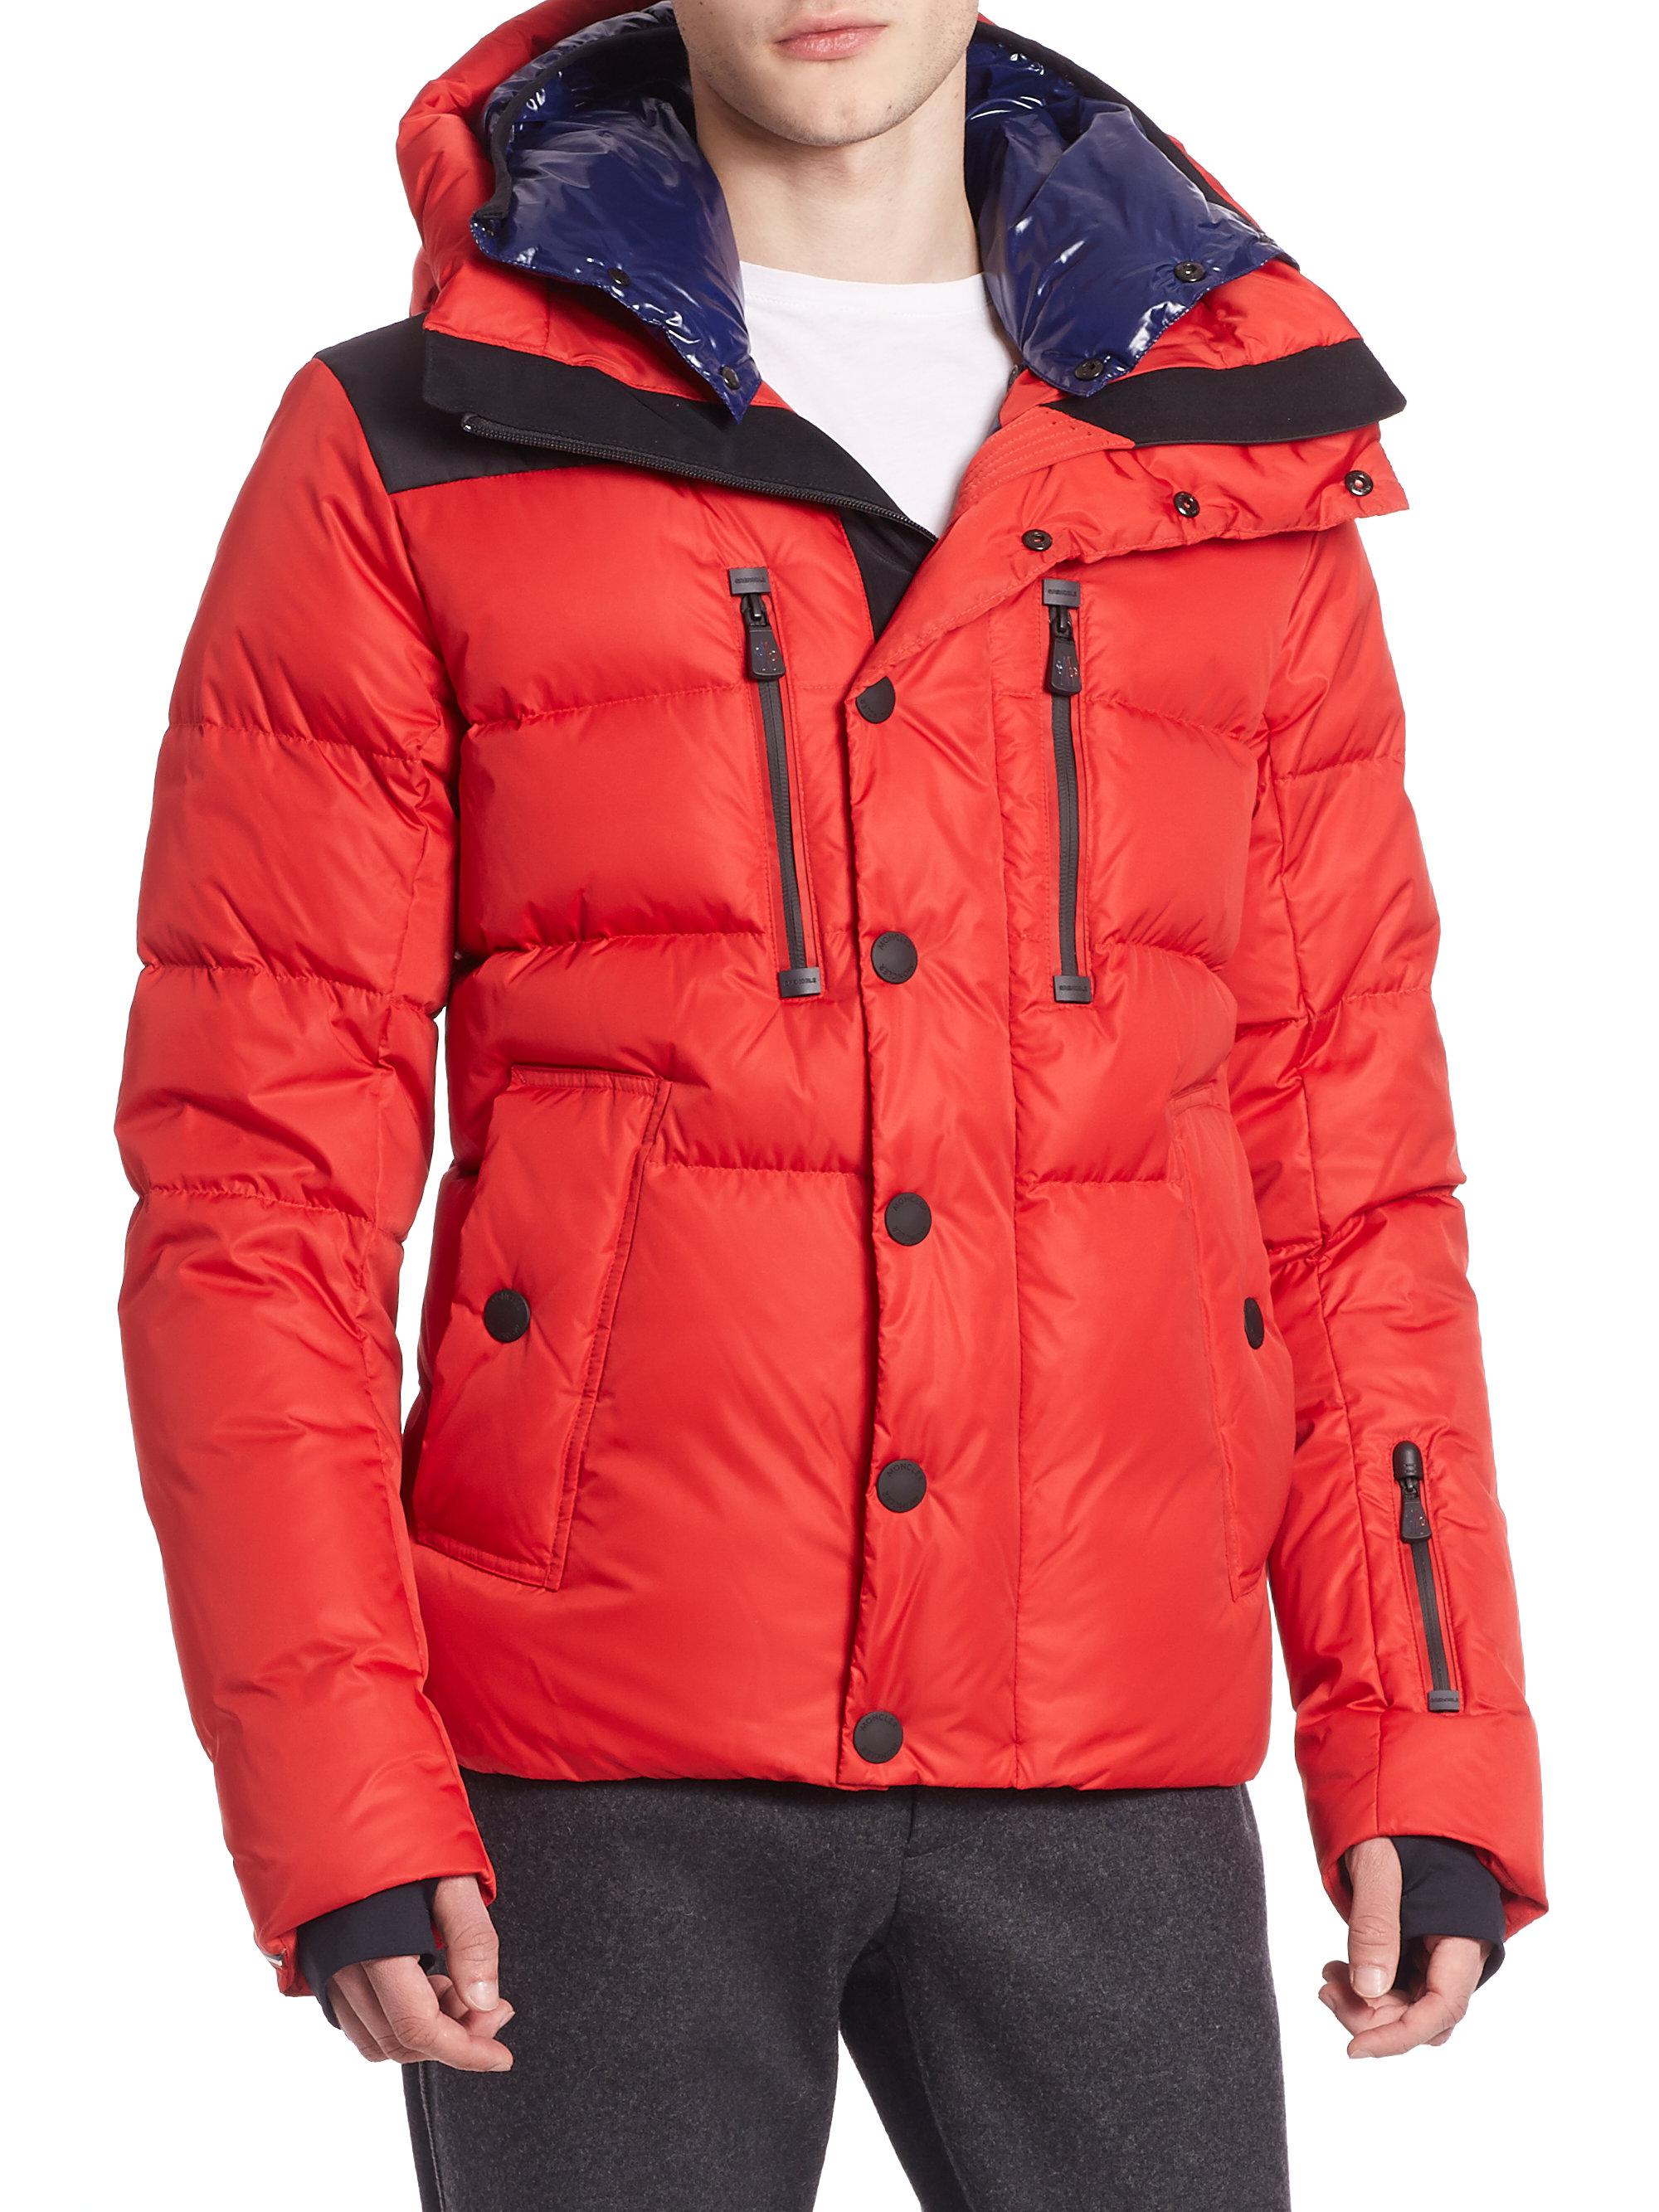 Lyst - Moncler Hooded Puffer Down Jacket in Red for Men